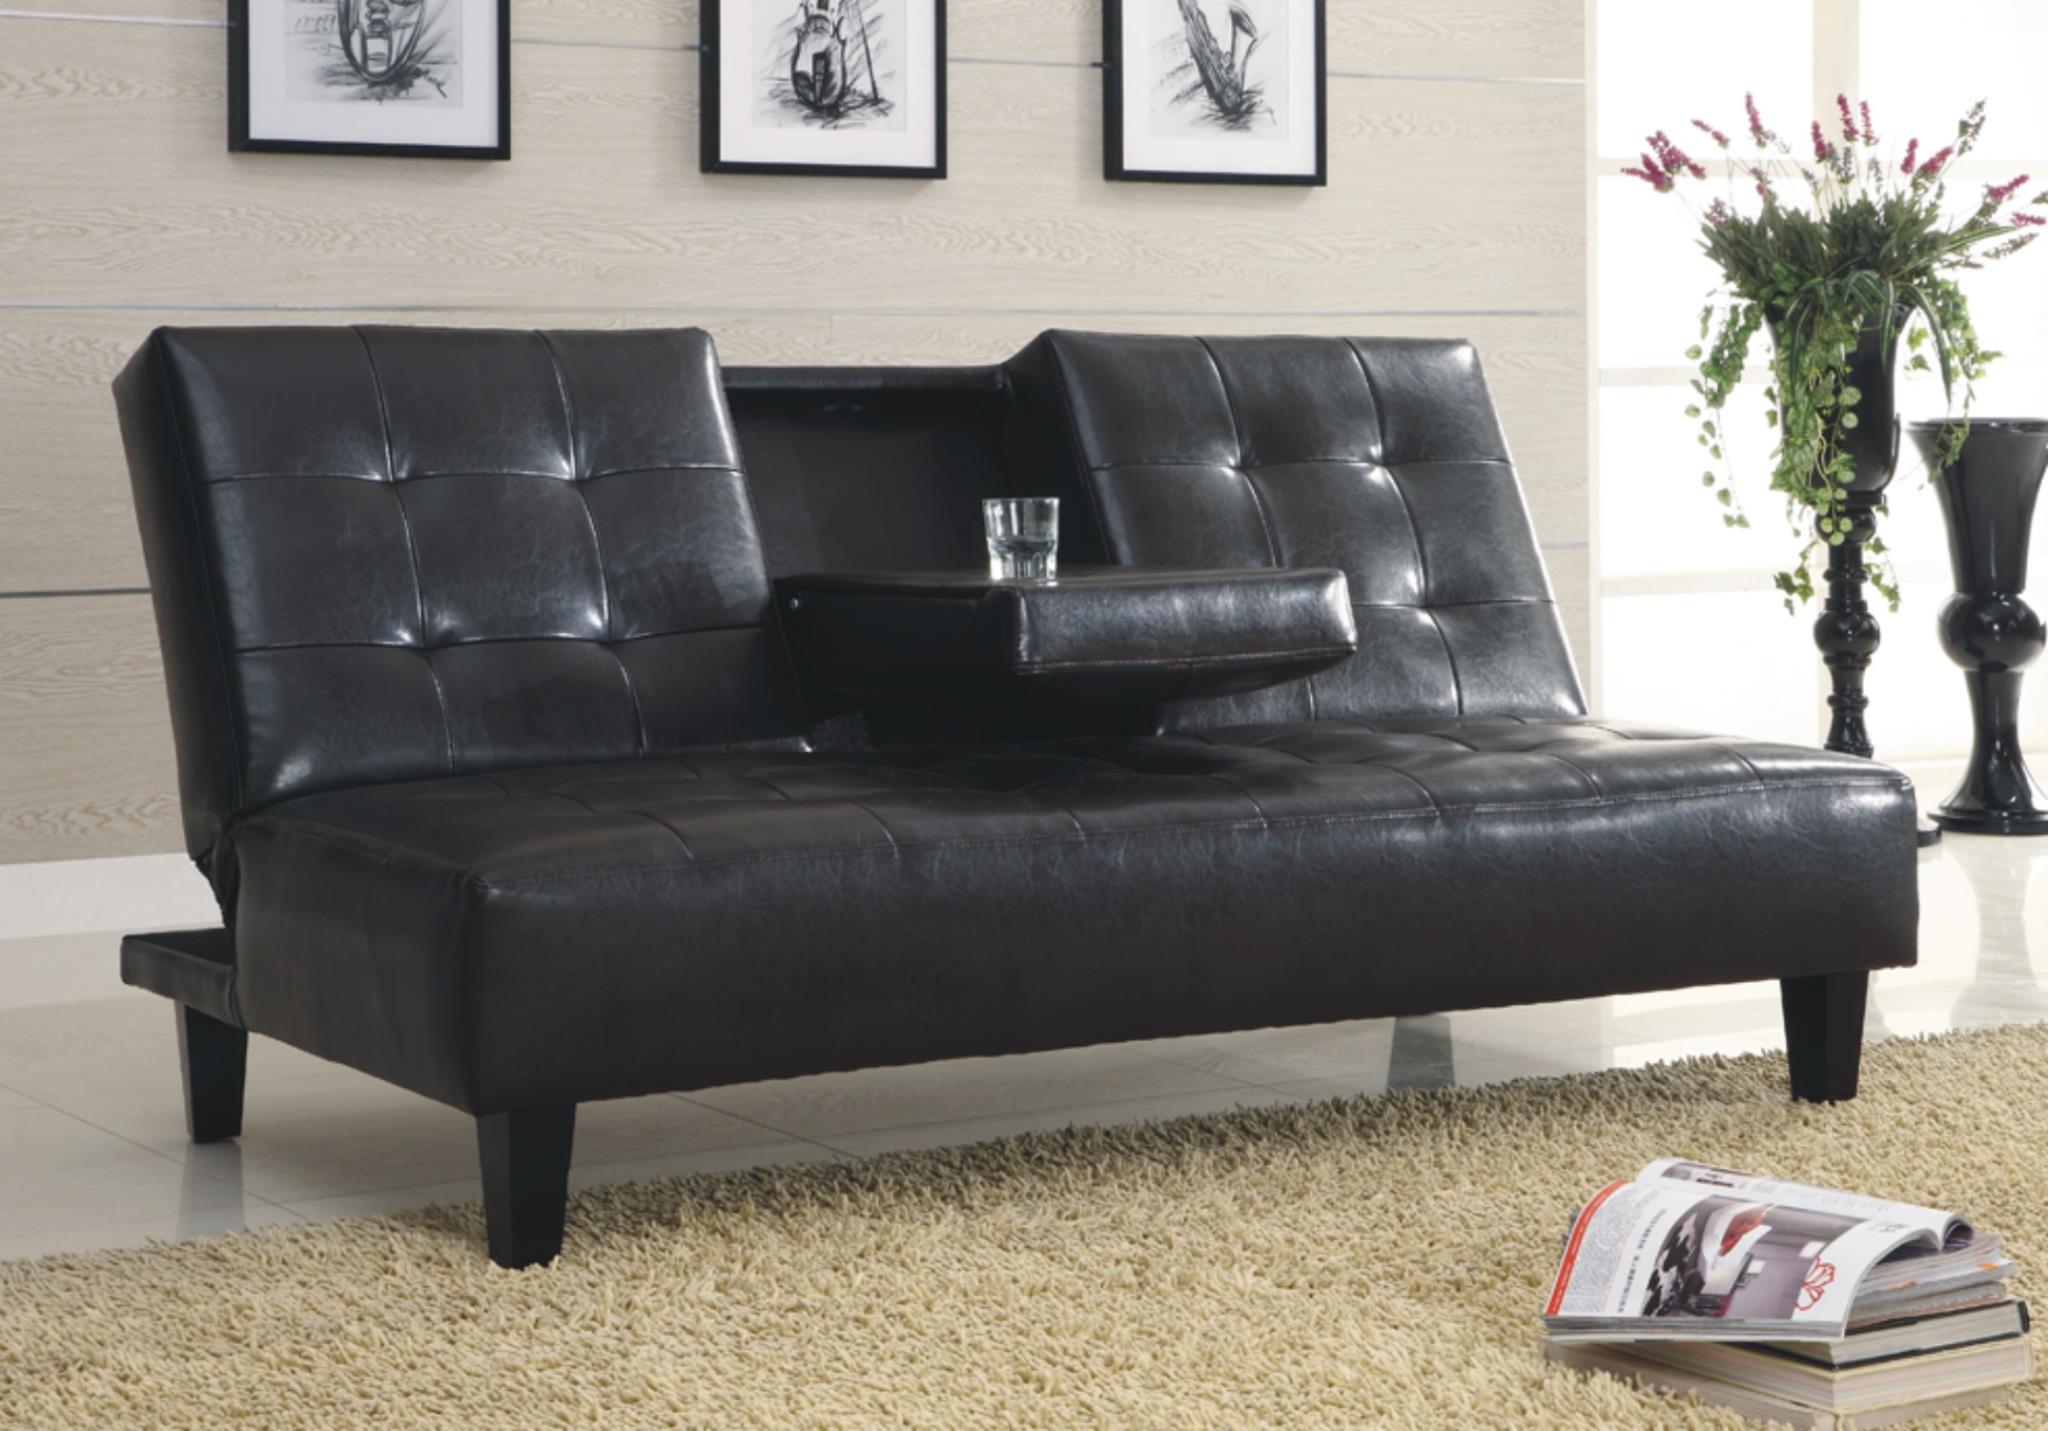 4414k Black Pu Sofa Bed The Roomstyle